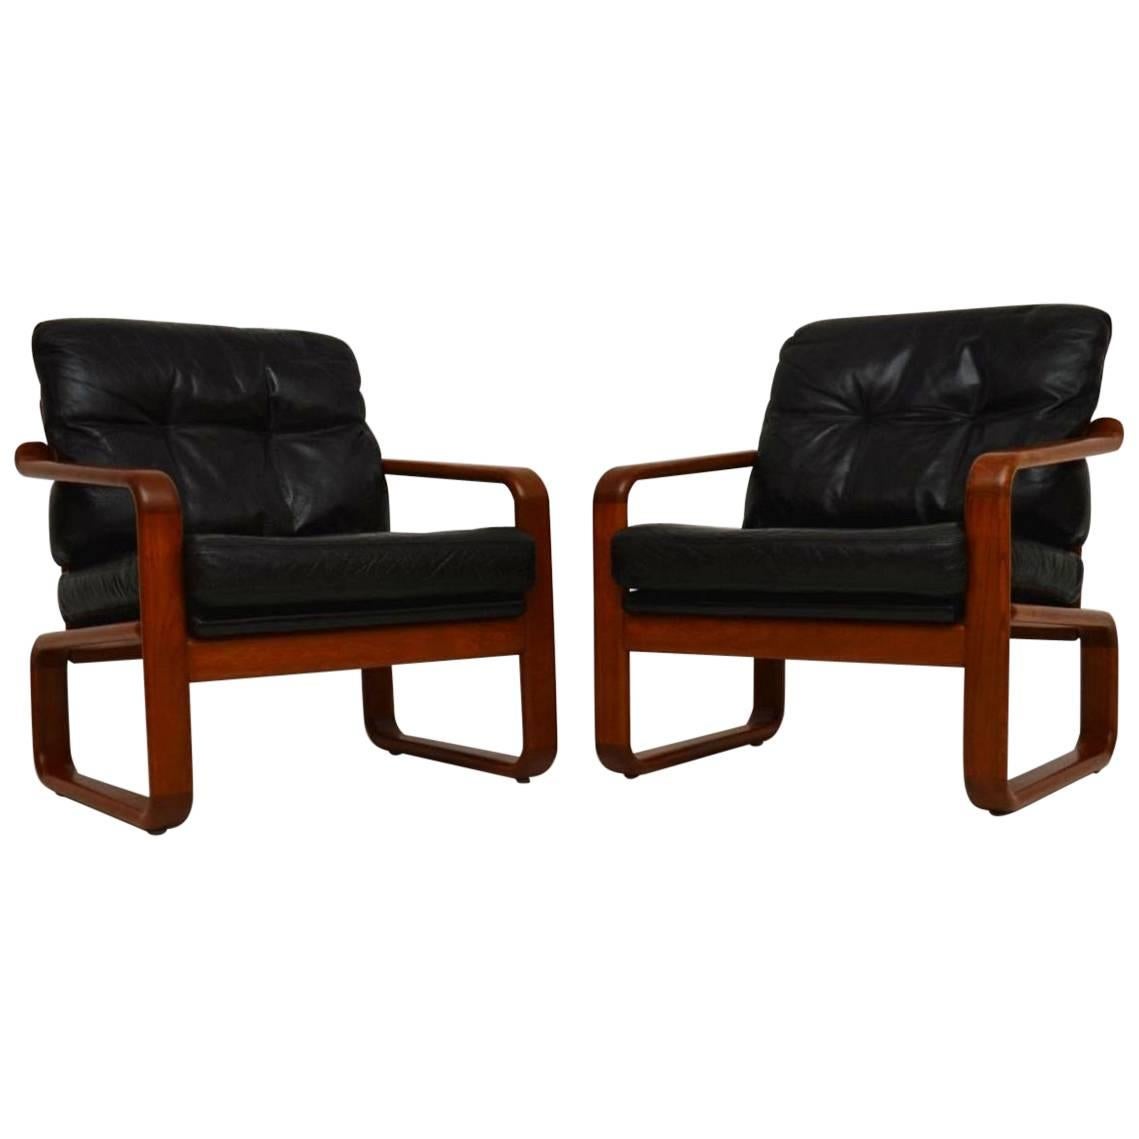 Pair of 1960s Danish Teak and Leather Armchairs